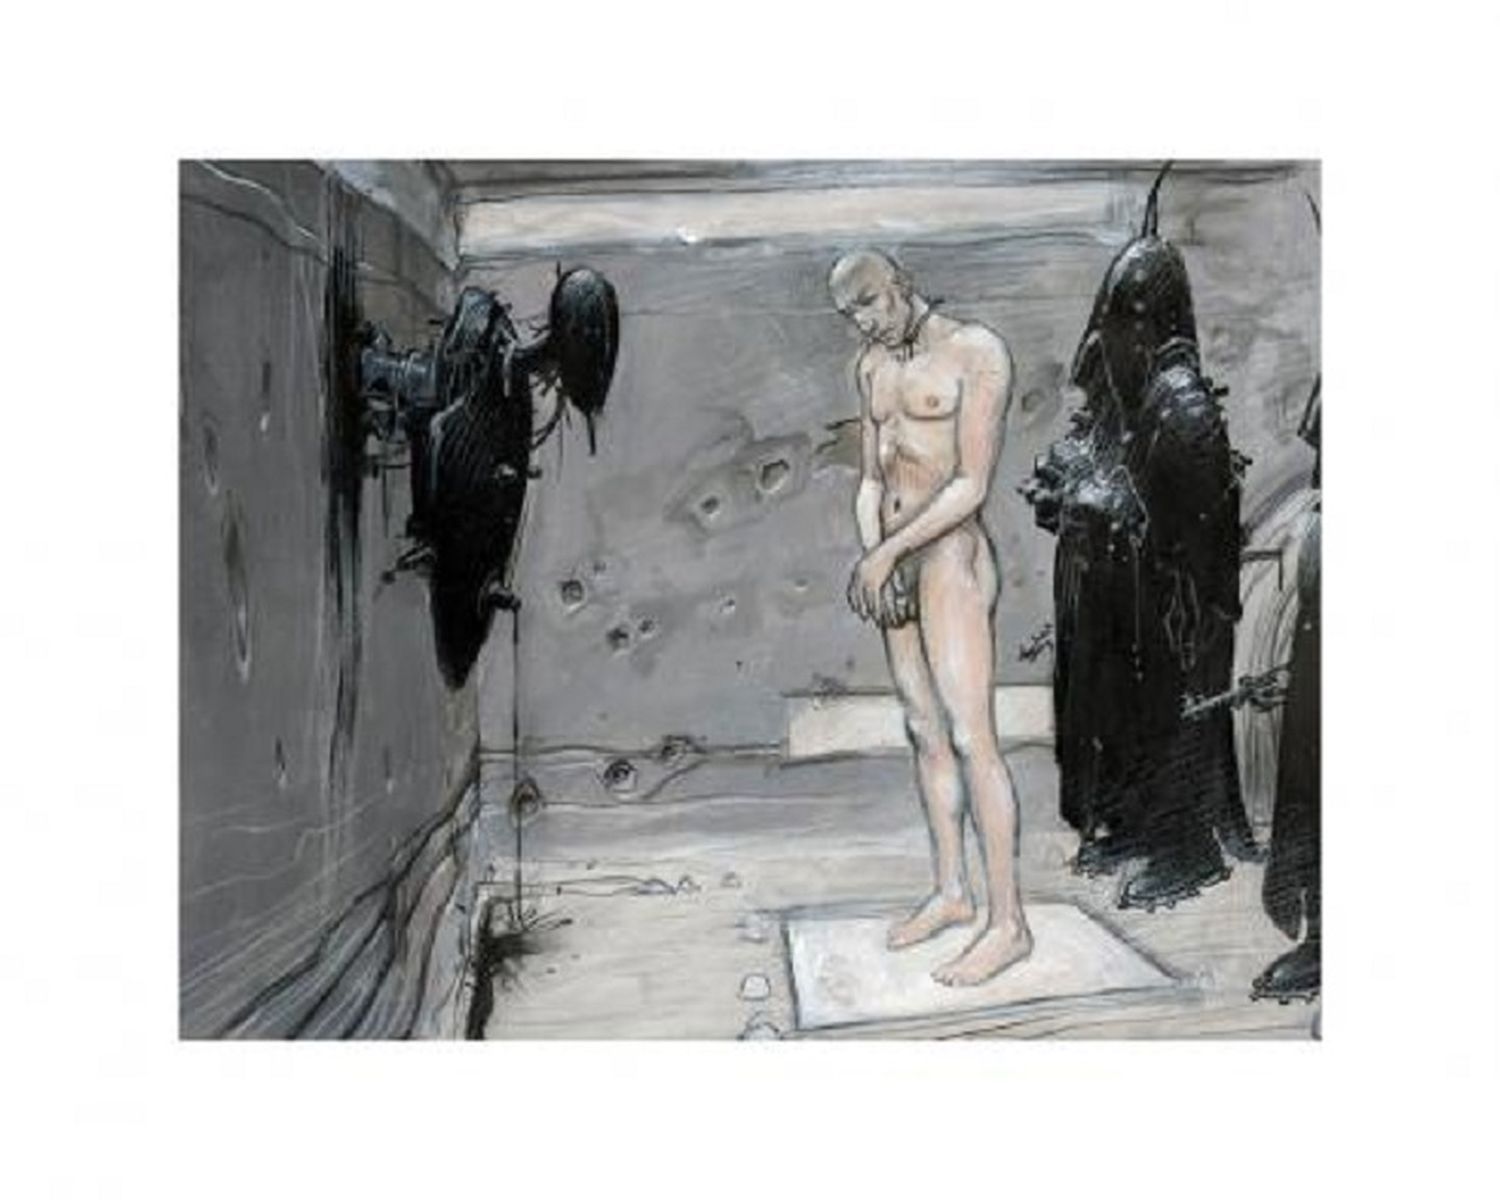 Enki Bilal Enki Bilal
Naked man

Pigment print, numbered and signed by the autho&hellip;